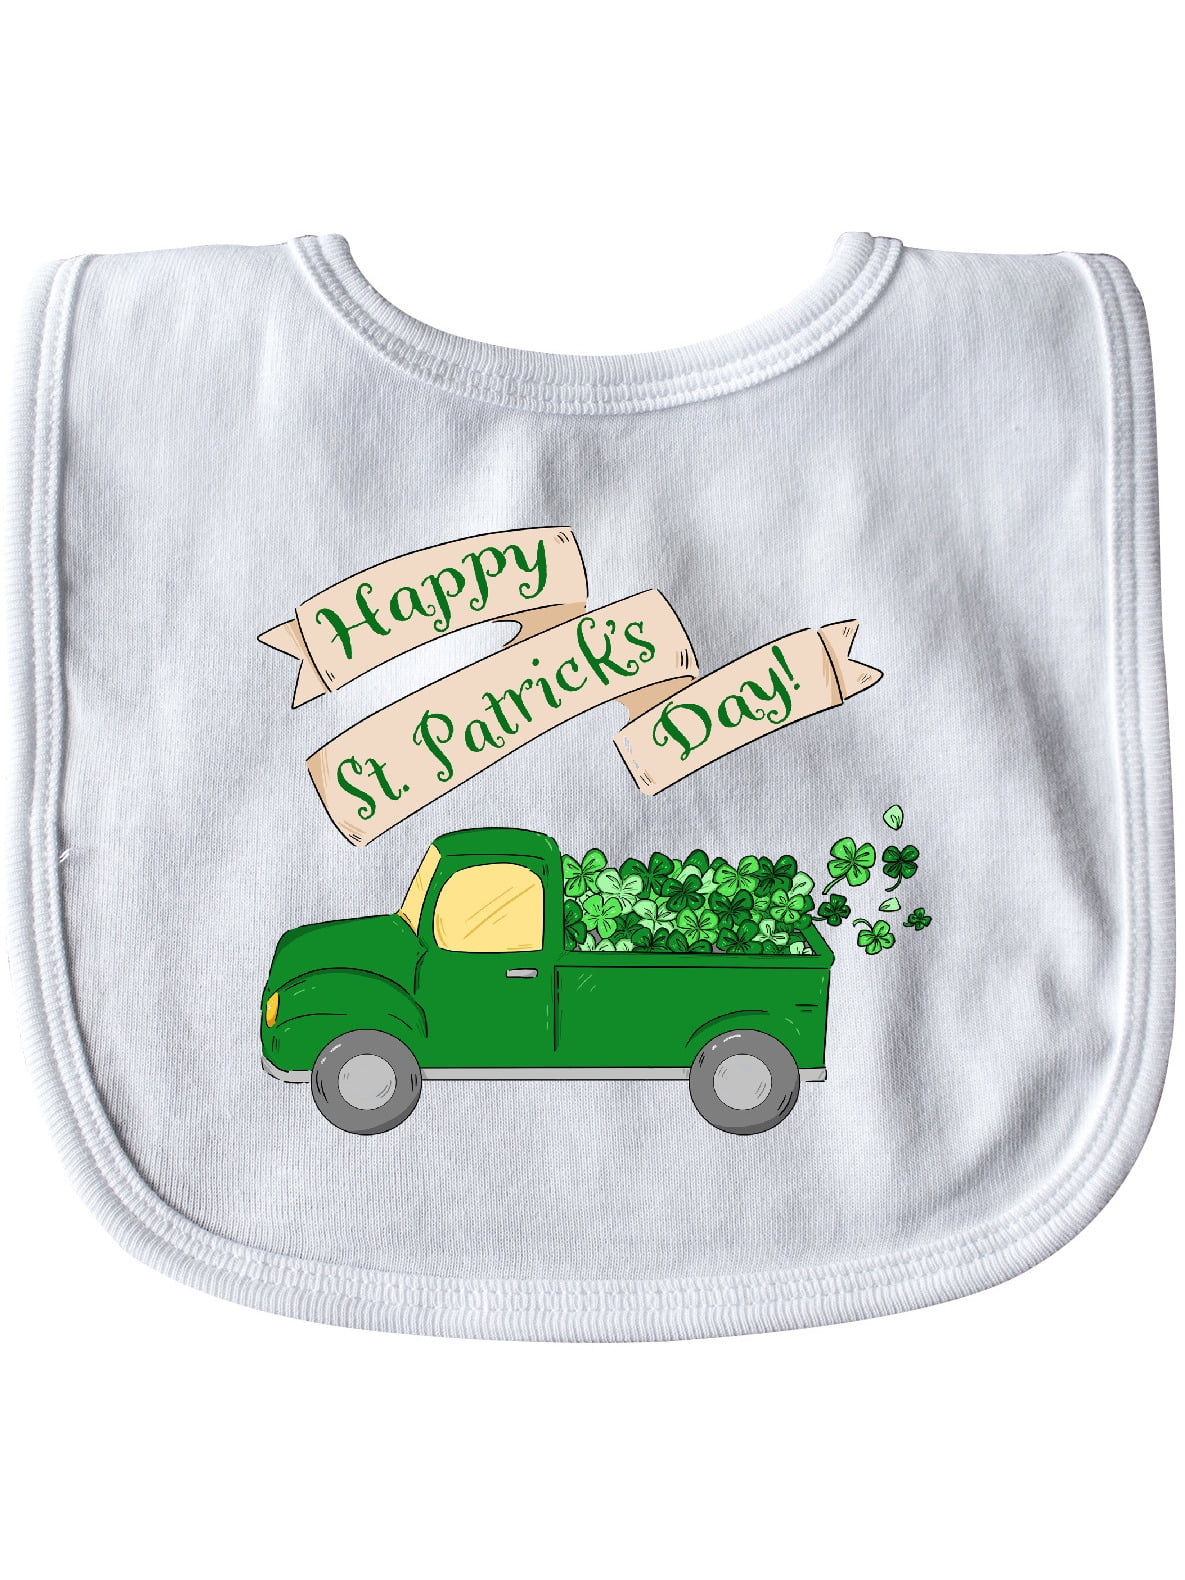 Download Happy St. Patrick's Day Green Truck with Clovers Baby Bib ...